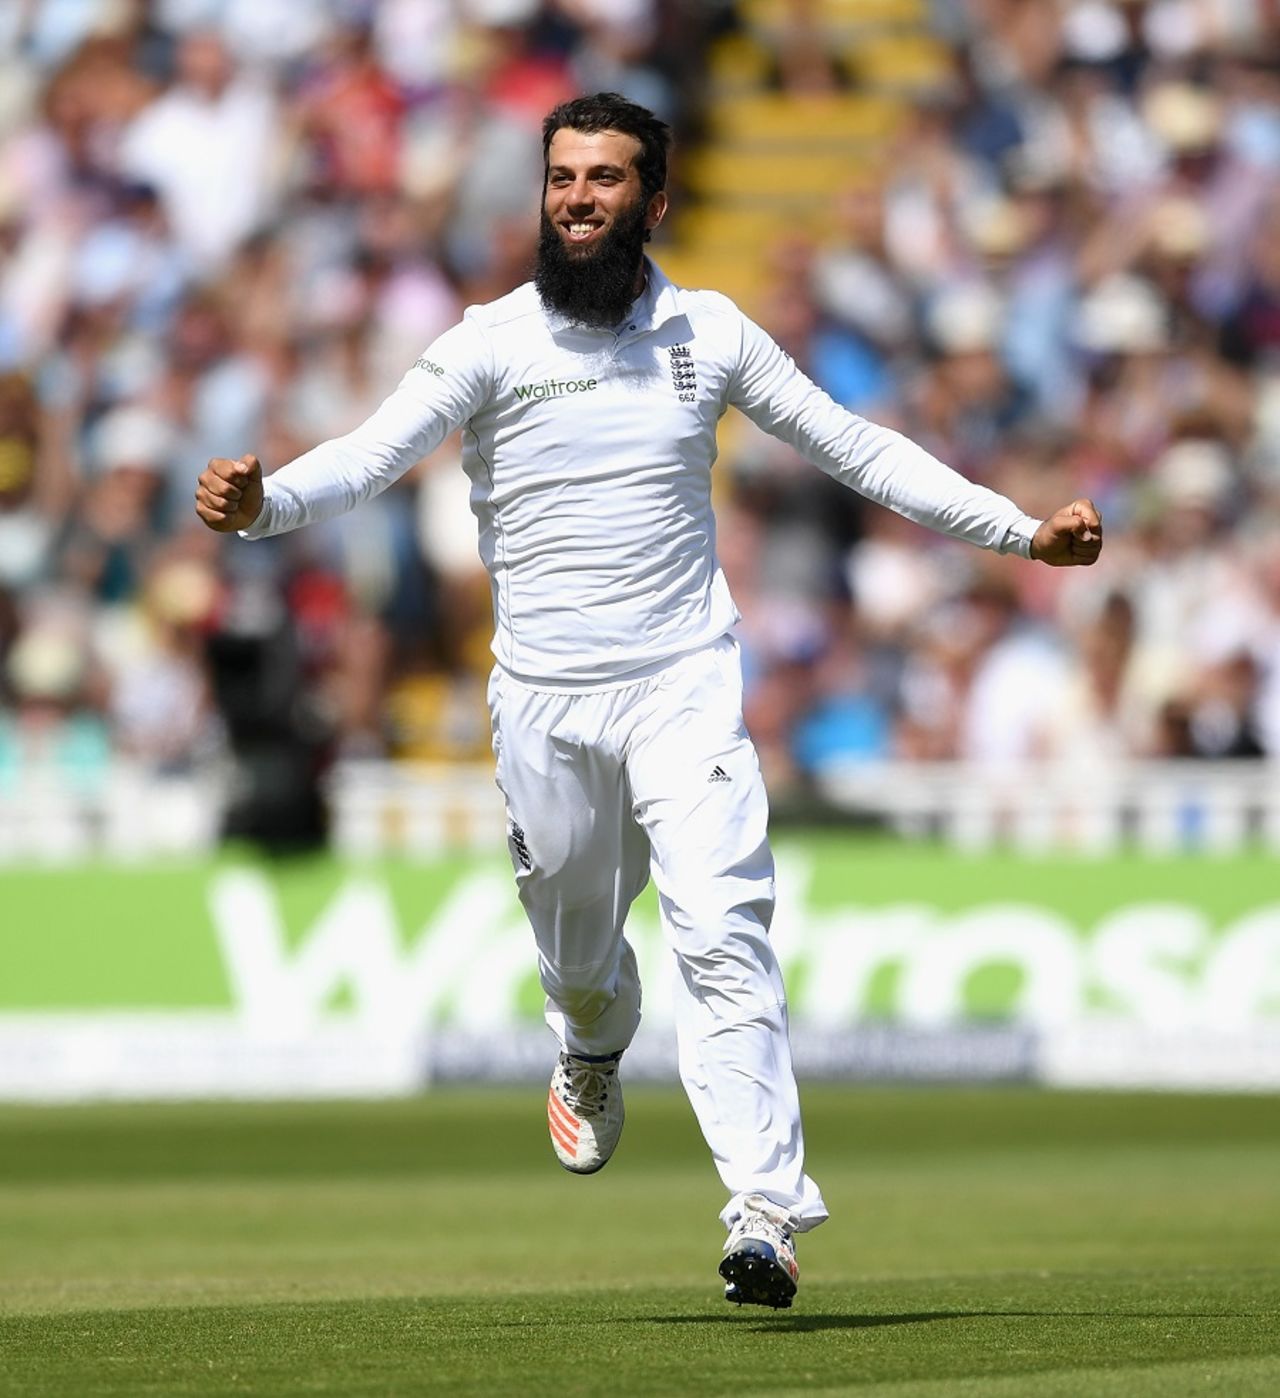 Moeen Ali found his rhythm after lunch, England v Pakistan, 3rd Investec Test, Edgbaston, 5th day, August 7, 2016